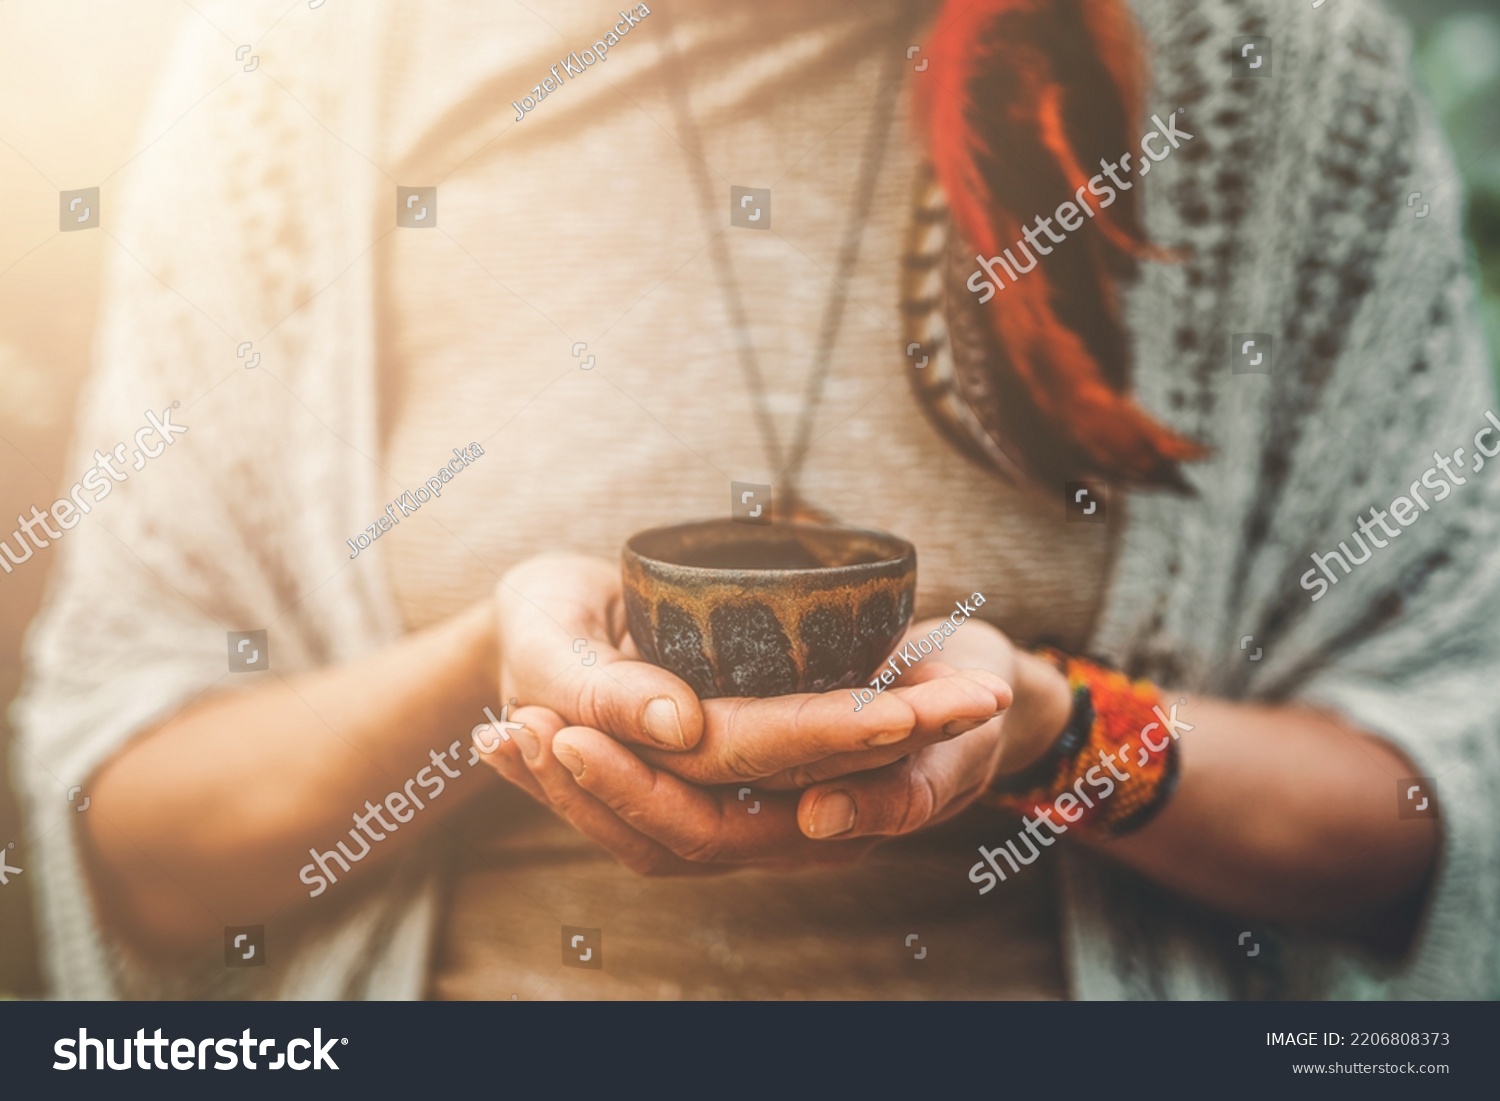 Cacao ceremony, heart opening medicine. Ceremony space. Cacao cup in woman's hand. #2206808373